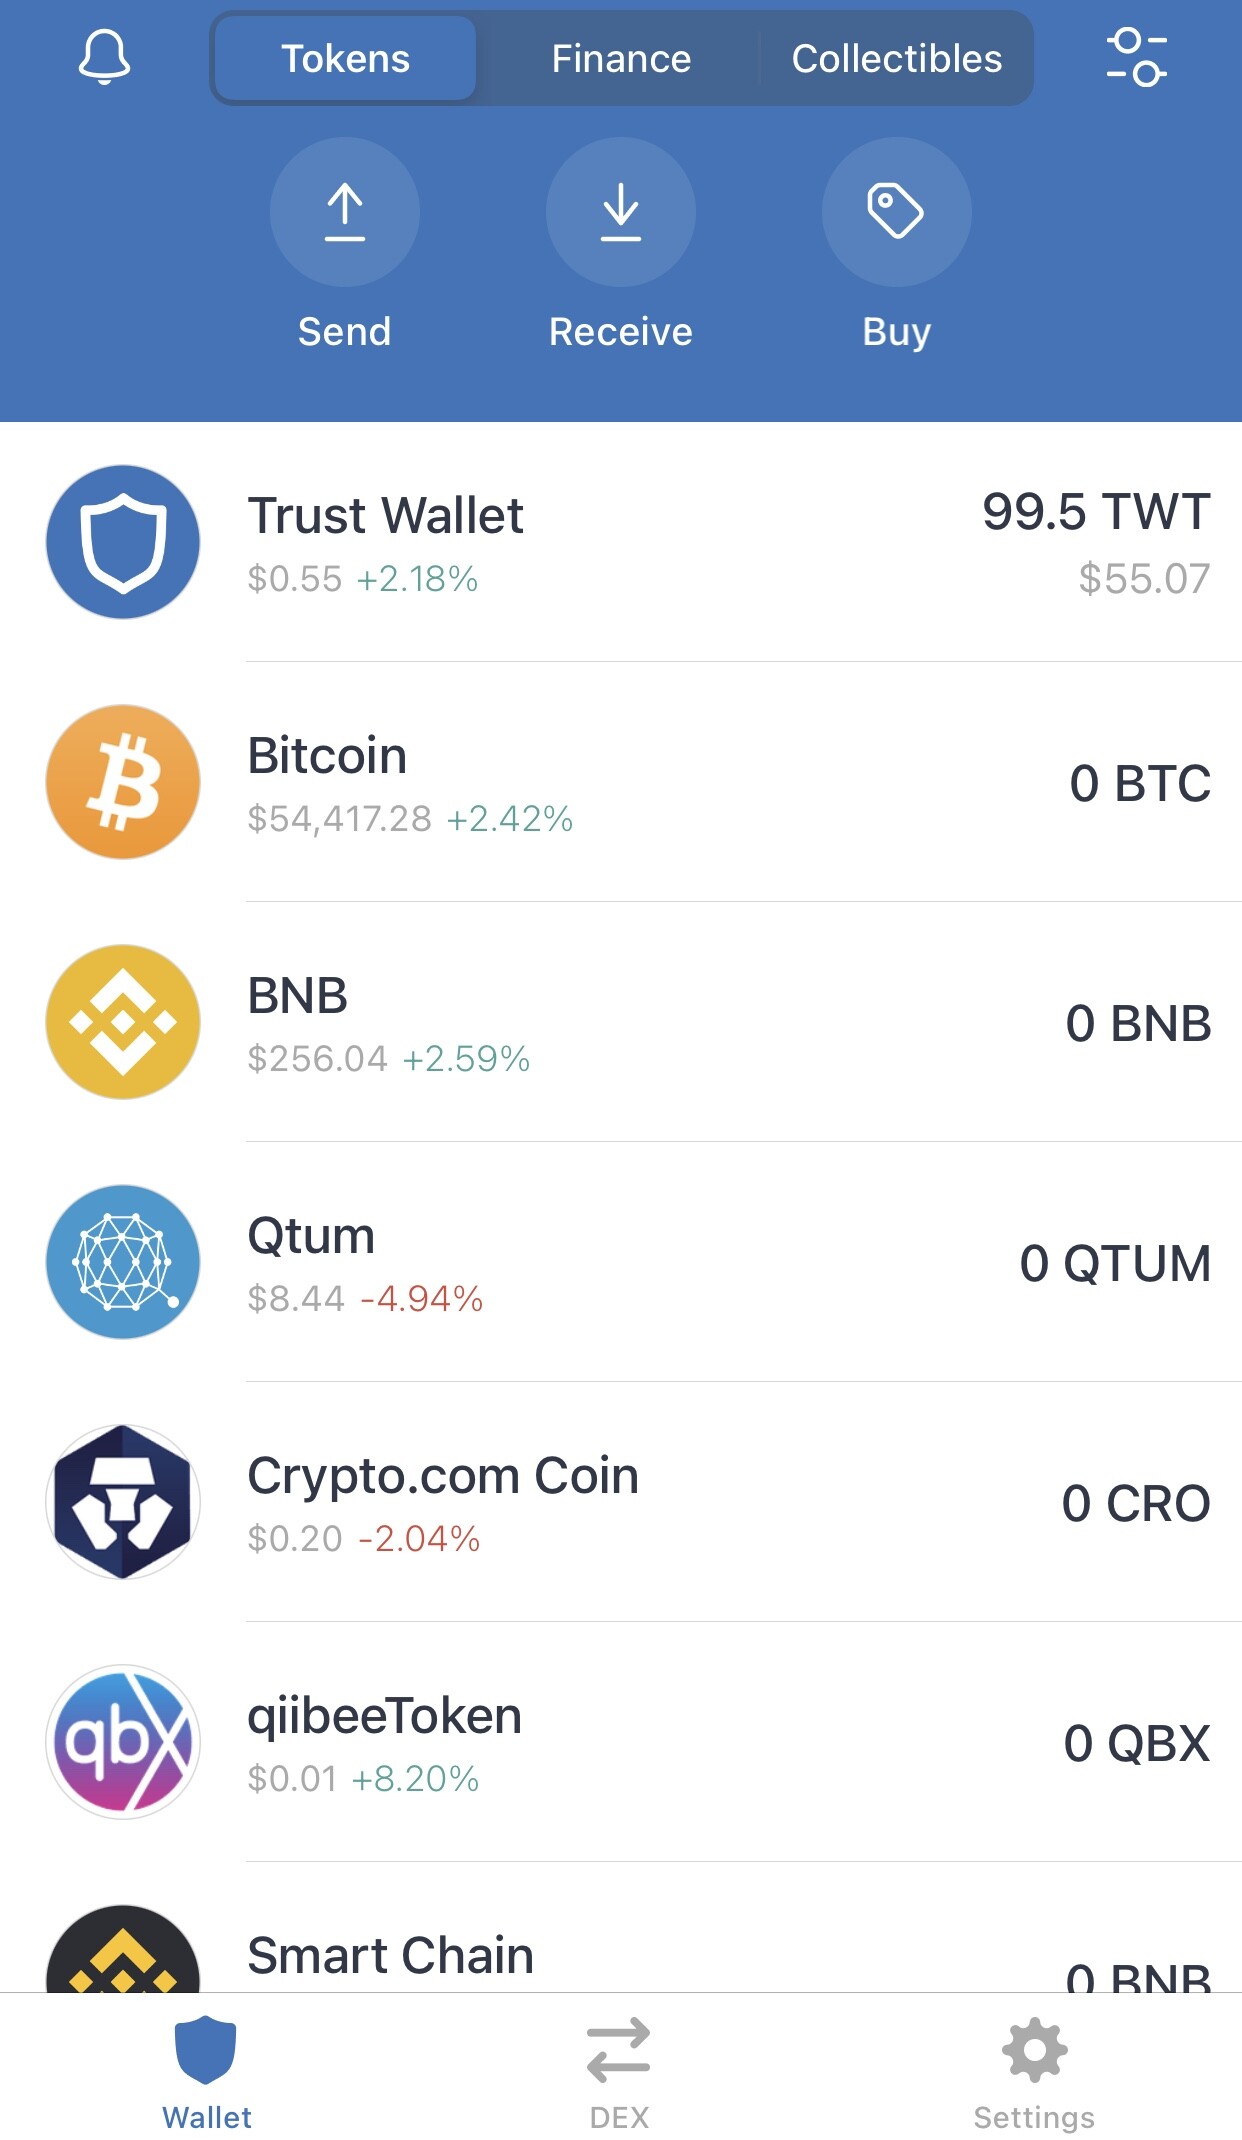 Qtum to trust Wallet from Binance, missing balance - #32 ...